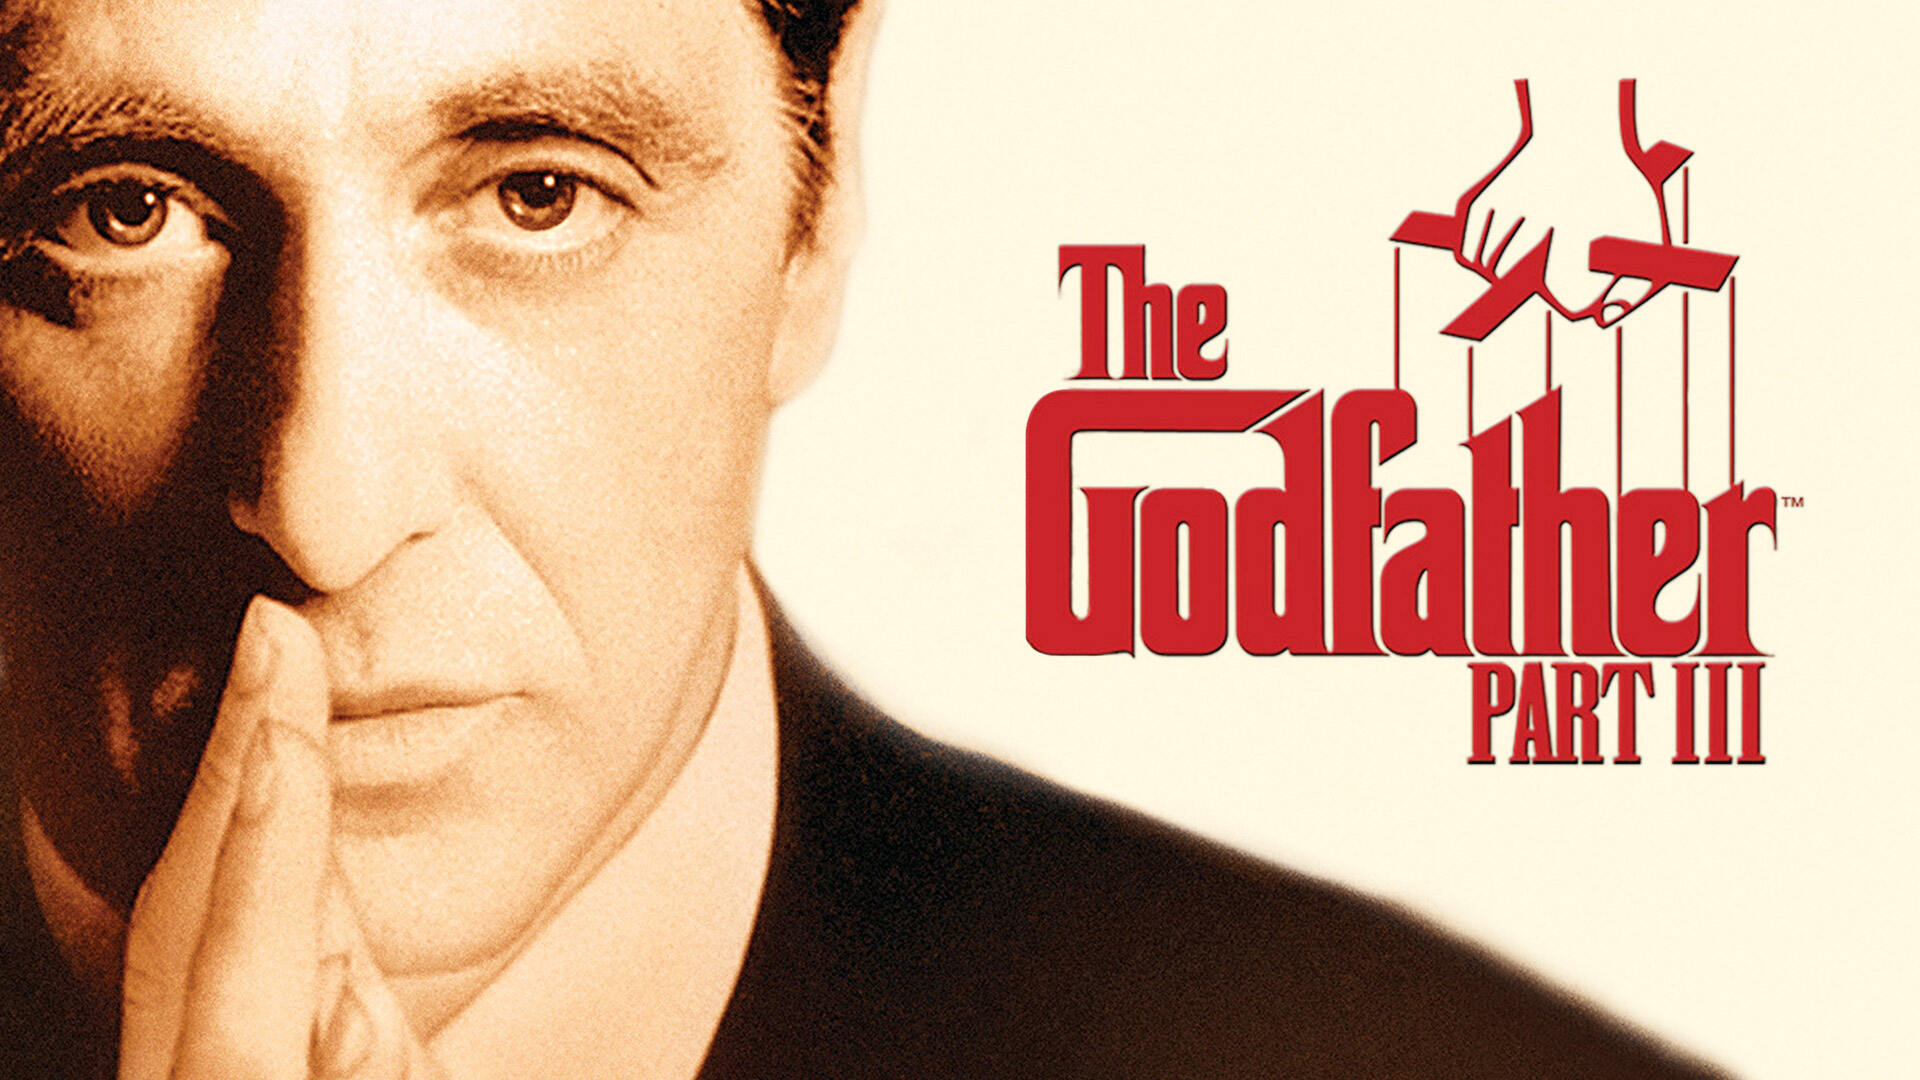 39-facts-about-the-movie-the-godfather-part-iii